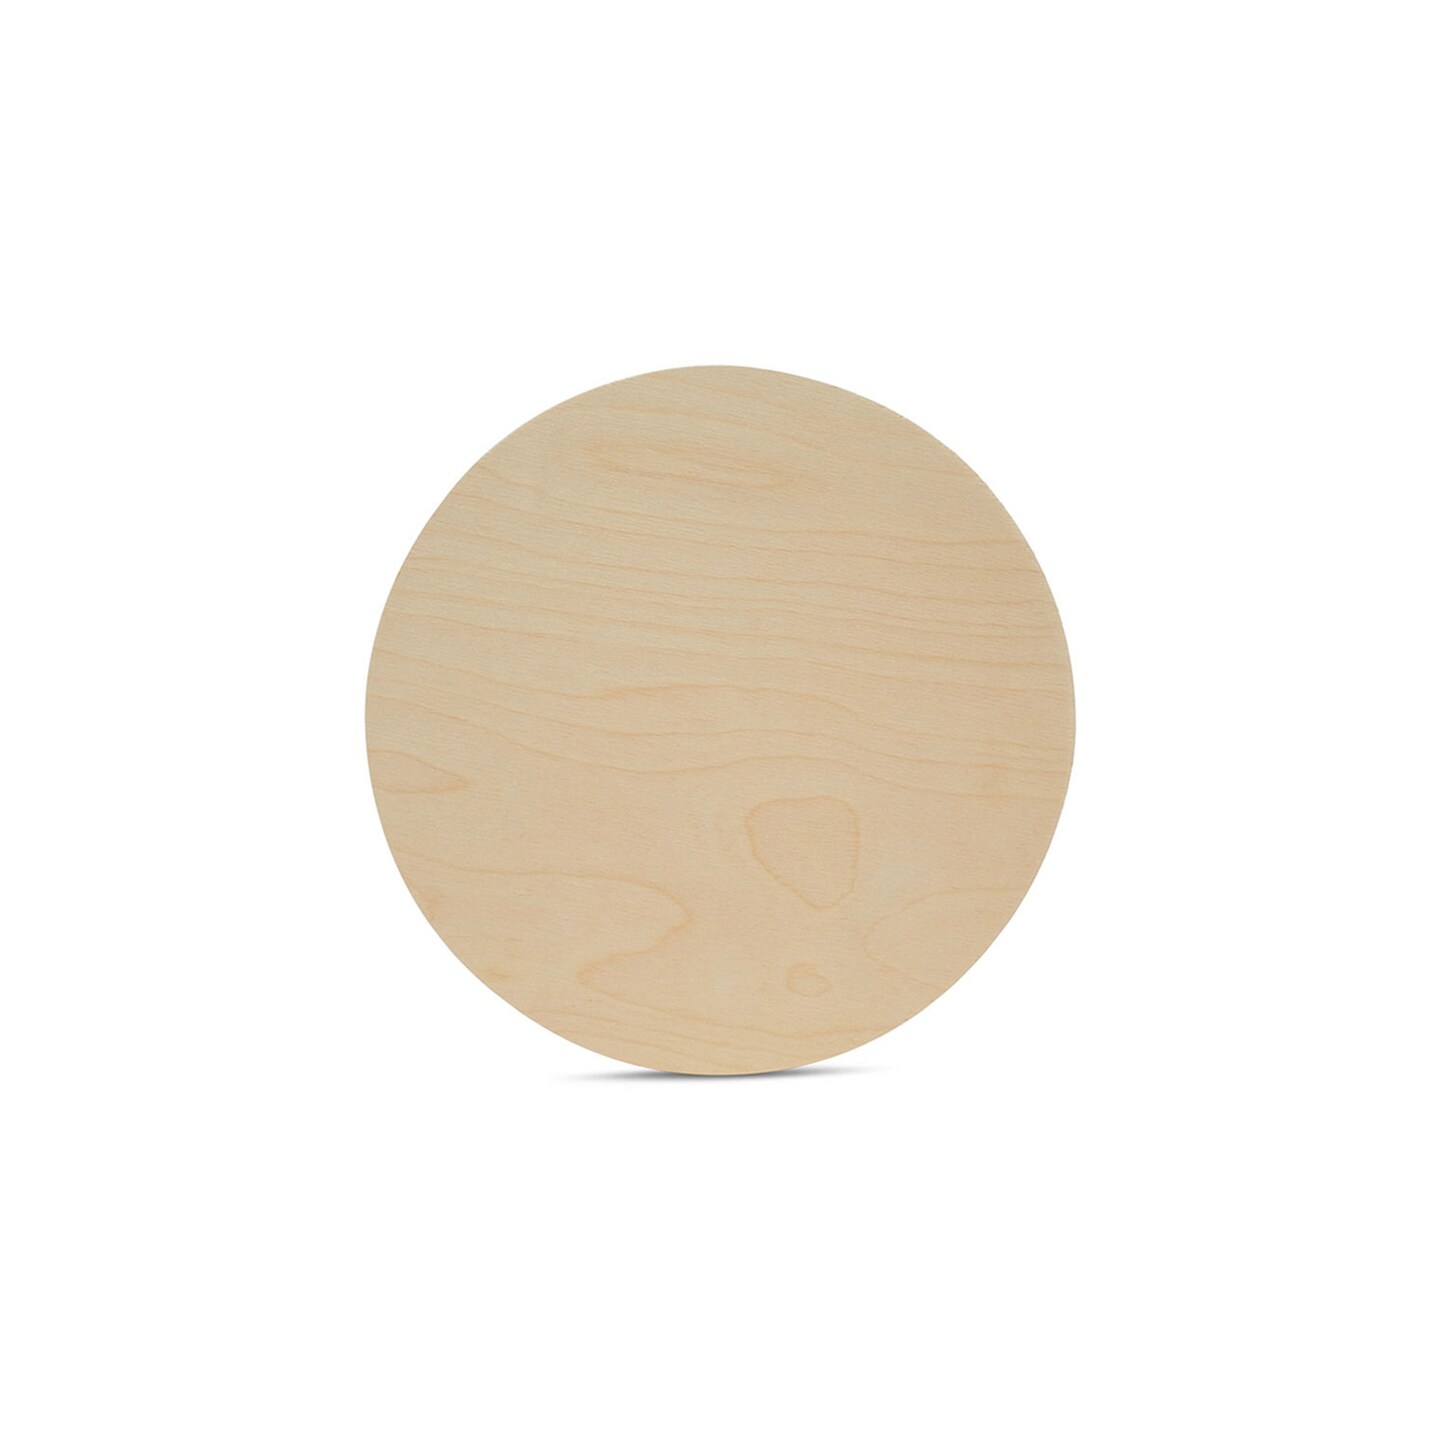 Wood Circles 12 inch, 1/4 Inch Thick, Birch Plywood Discs, Pack of 3  Unfinished Wood Circles for Crafts, Wood Rounds by Woodpeckers